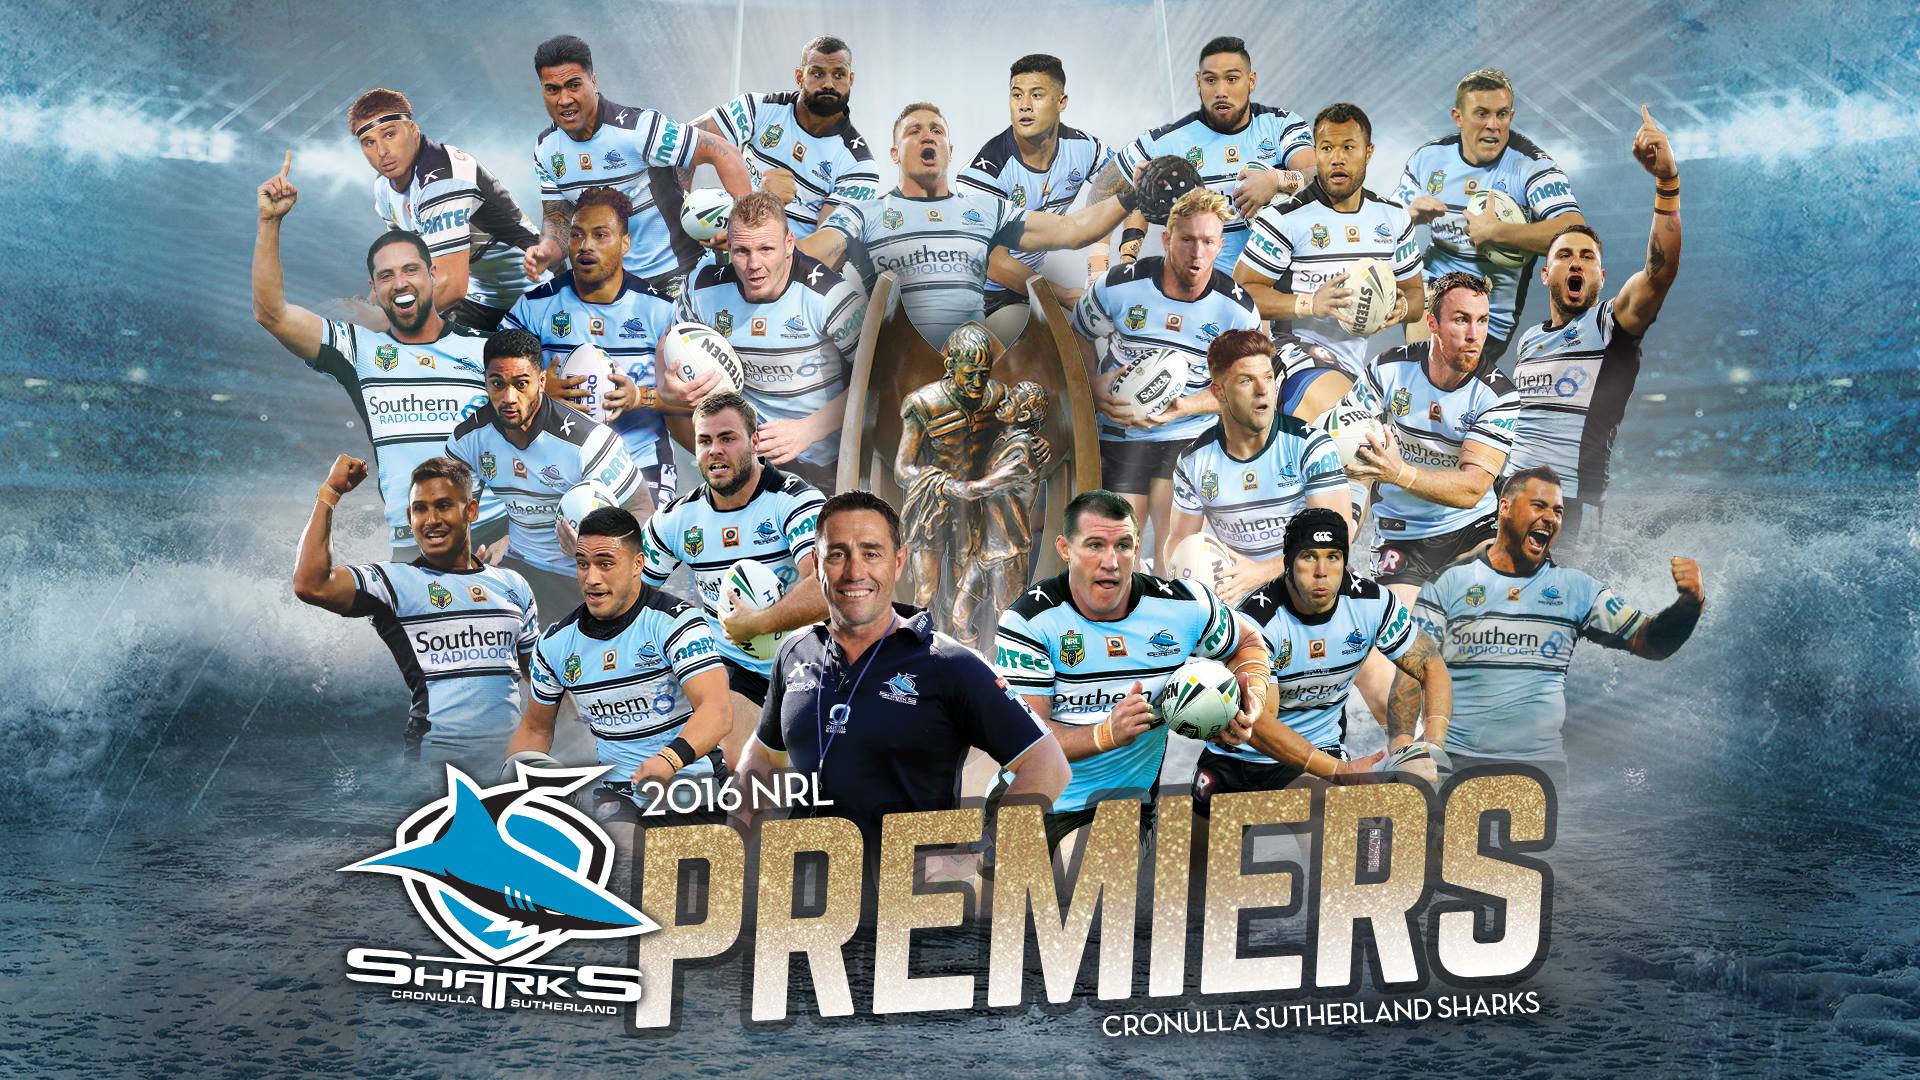 Premiers - Cronulla Sharks Facebook post at 9:32pm on Grand Final Night